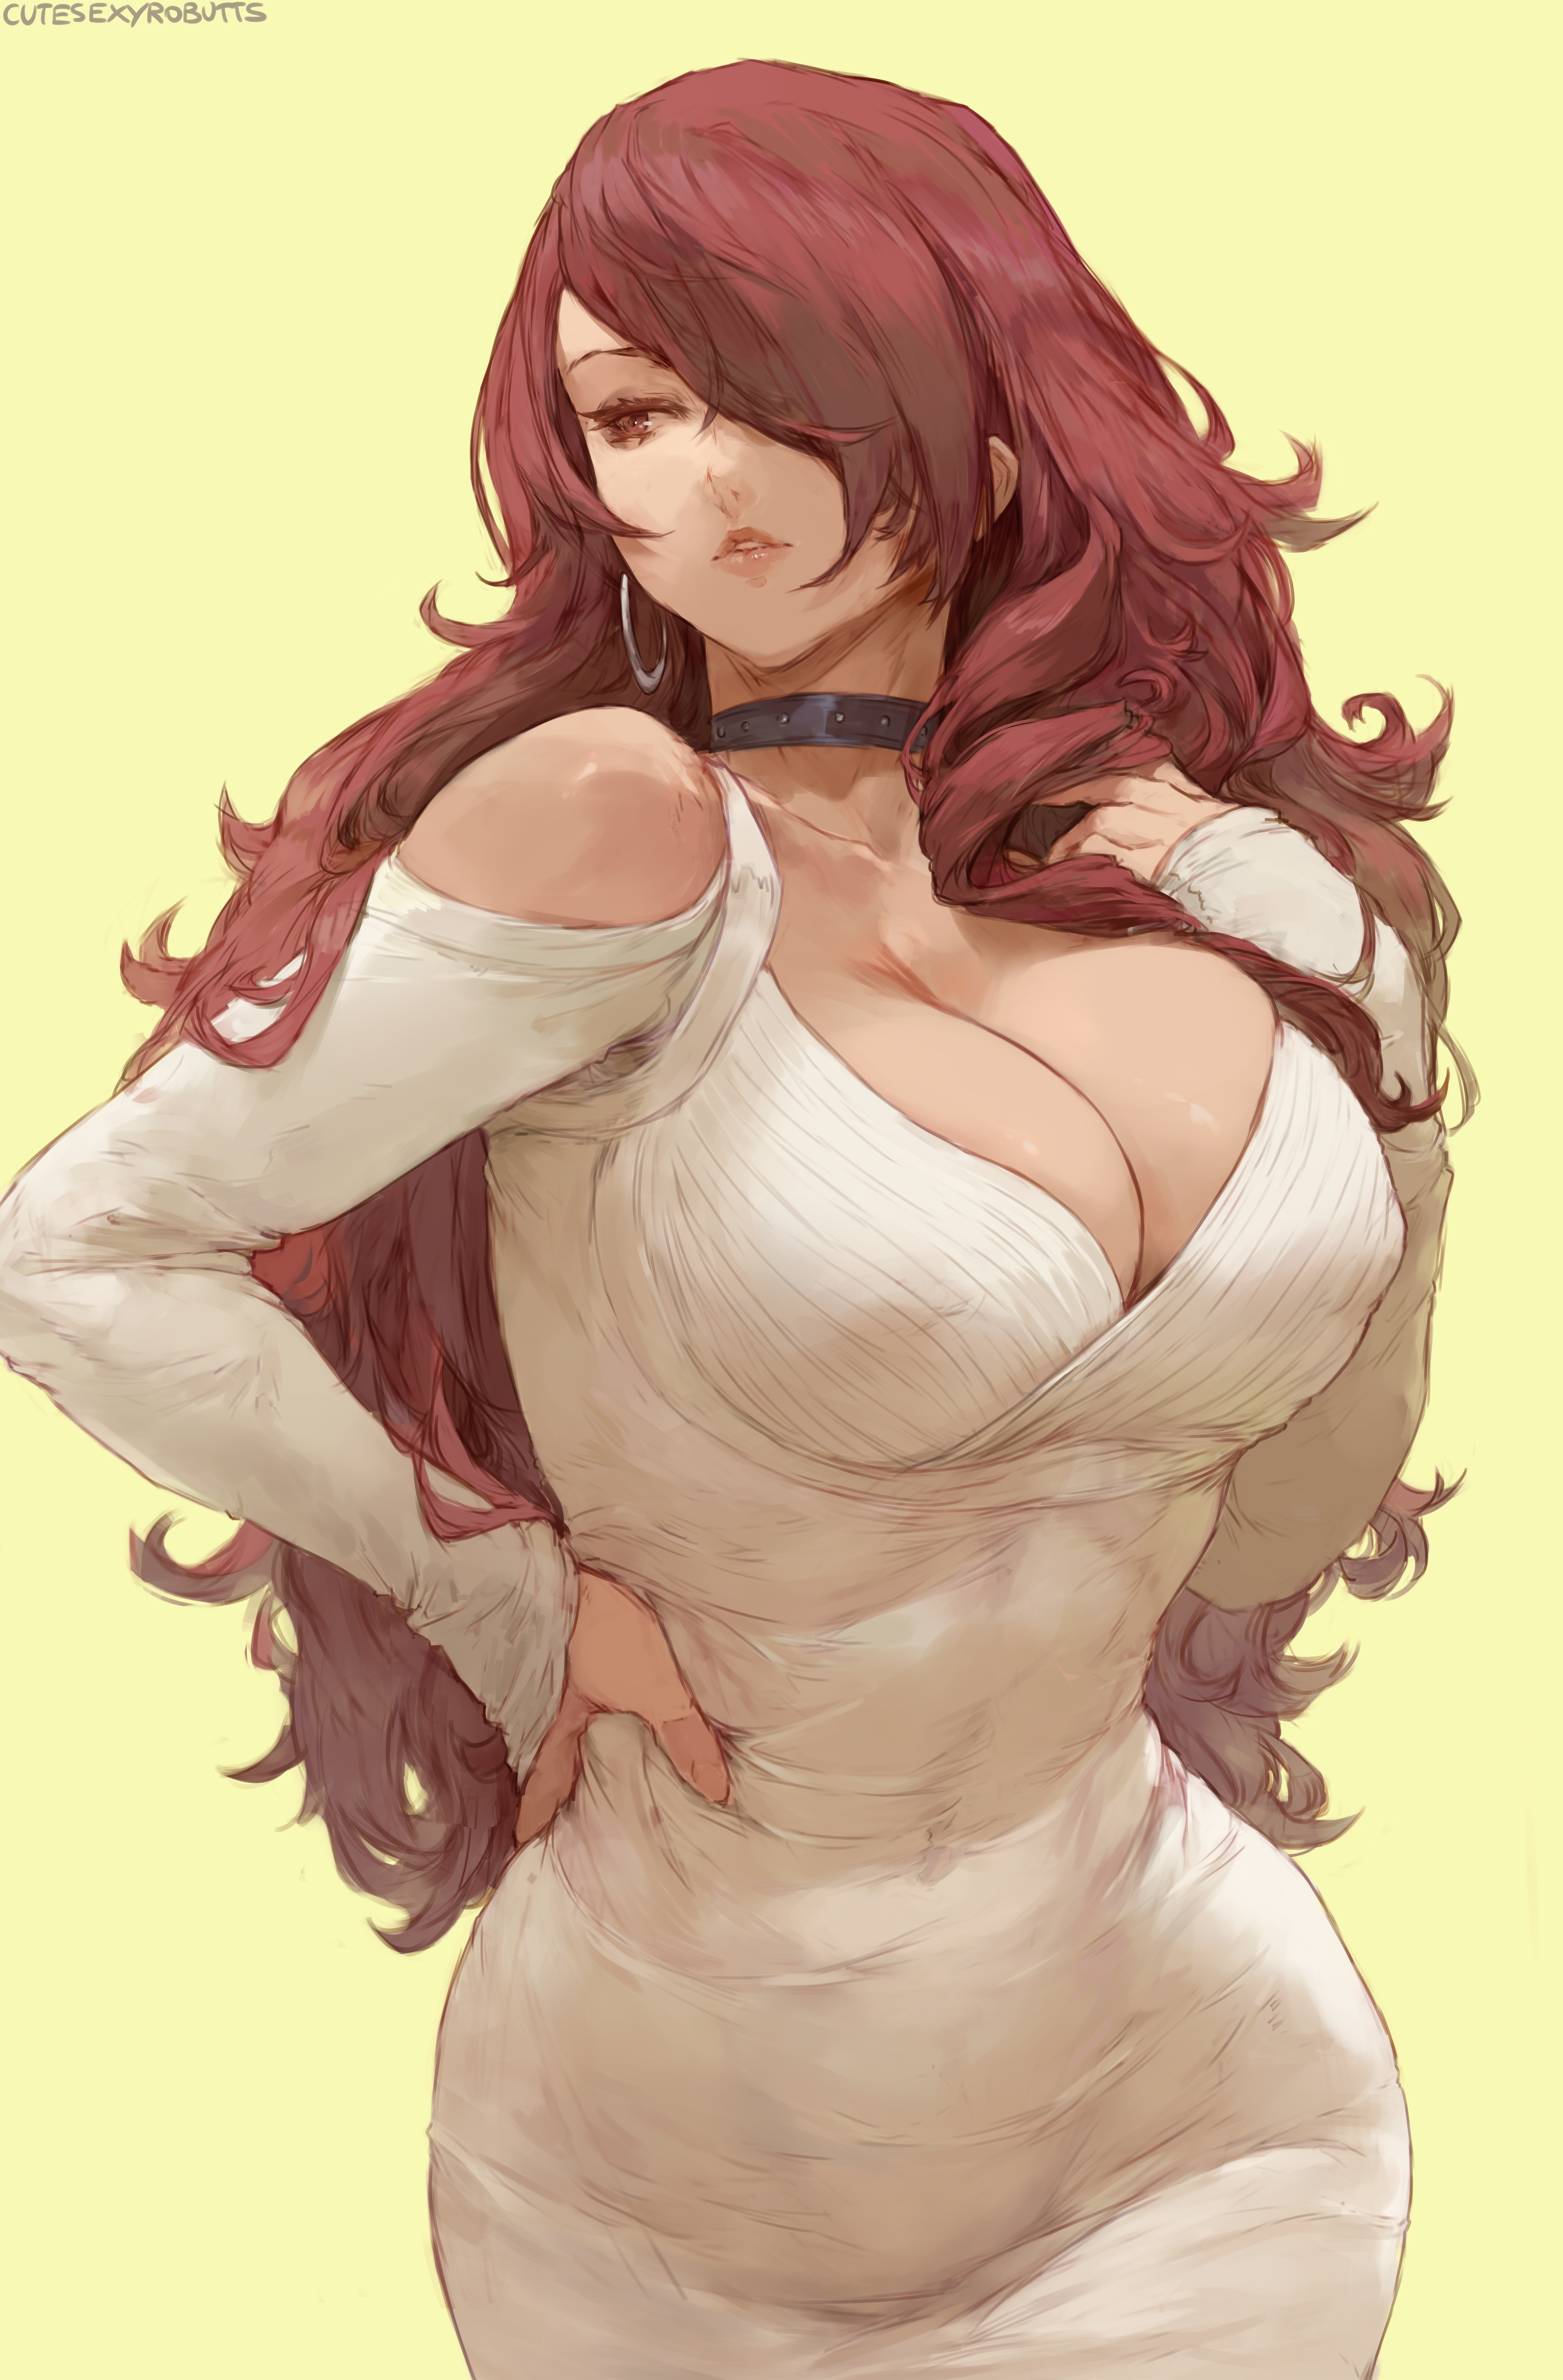 Anime 3612x5500 Kirijou Mitsuru Persona series Persona 3 video games anime anime girls redhead curvy choker cleavage dress tight clothing tight dress huge breasts simple background parted lips 2D artwork drawing fan art Cutesexyrobutts